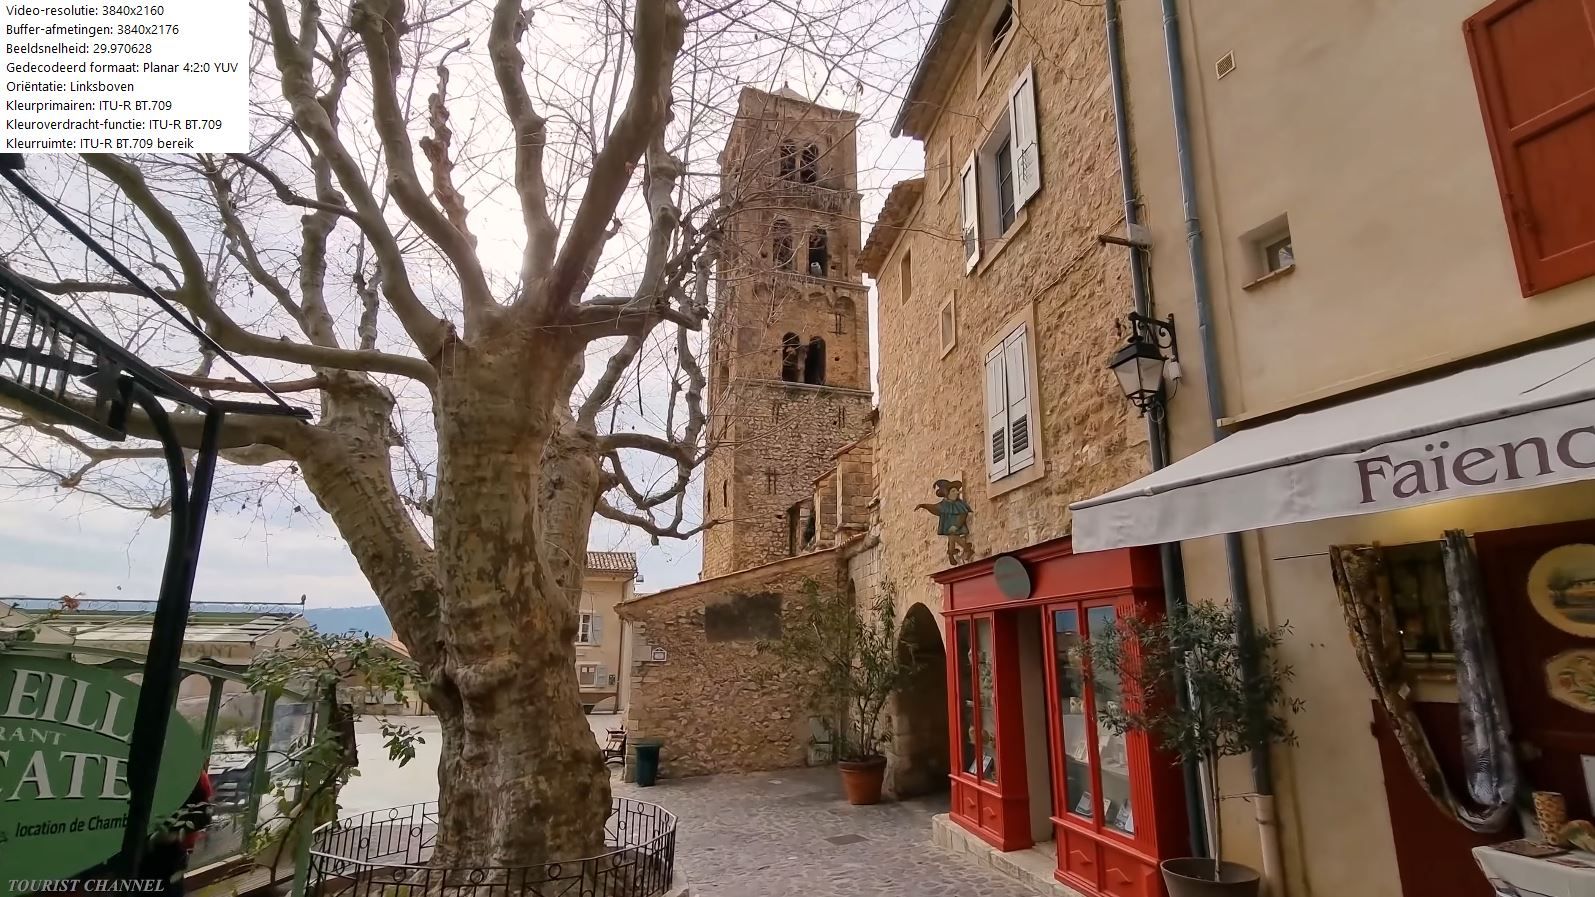 Moustiers-Sainte-Marie - The Most Beautiful Village in France - Character Provencal Village 4k